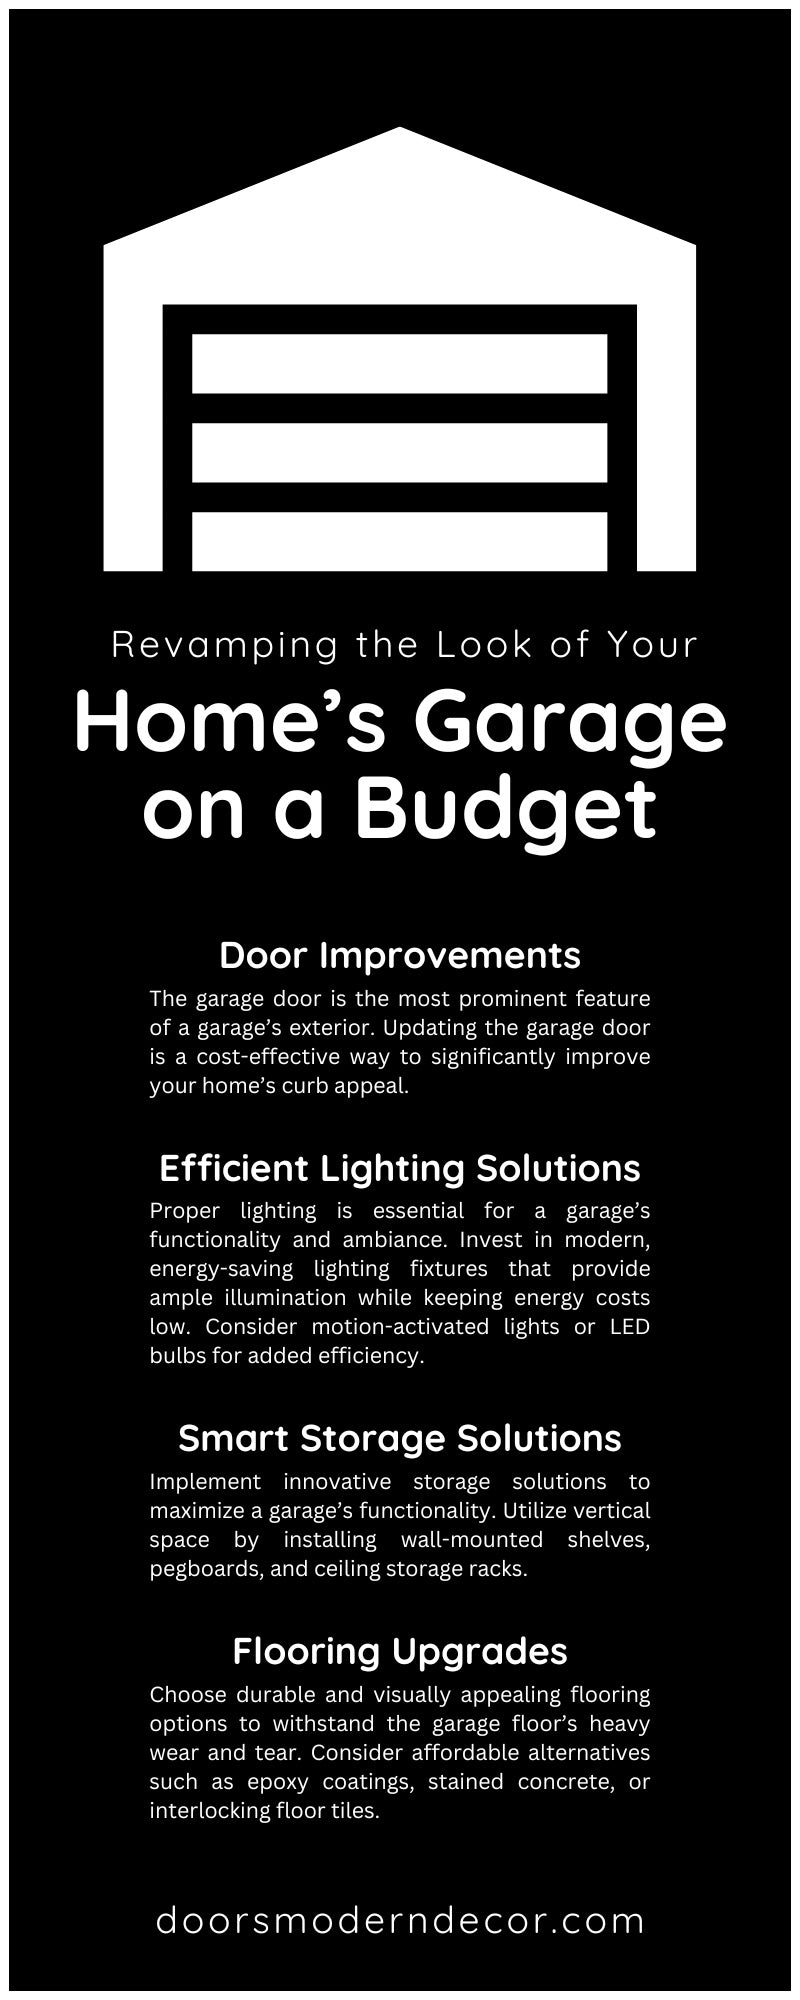 Revamping the Look of Your Home’s Garage on a Budget